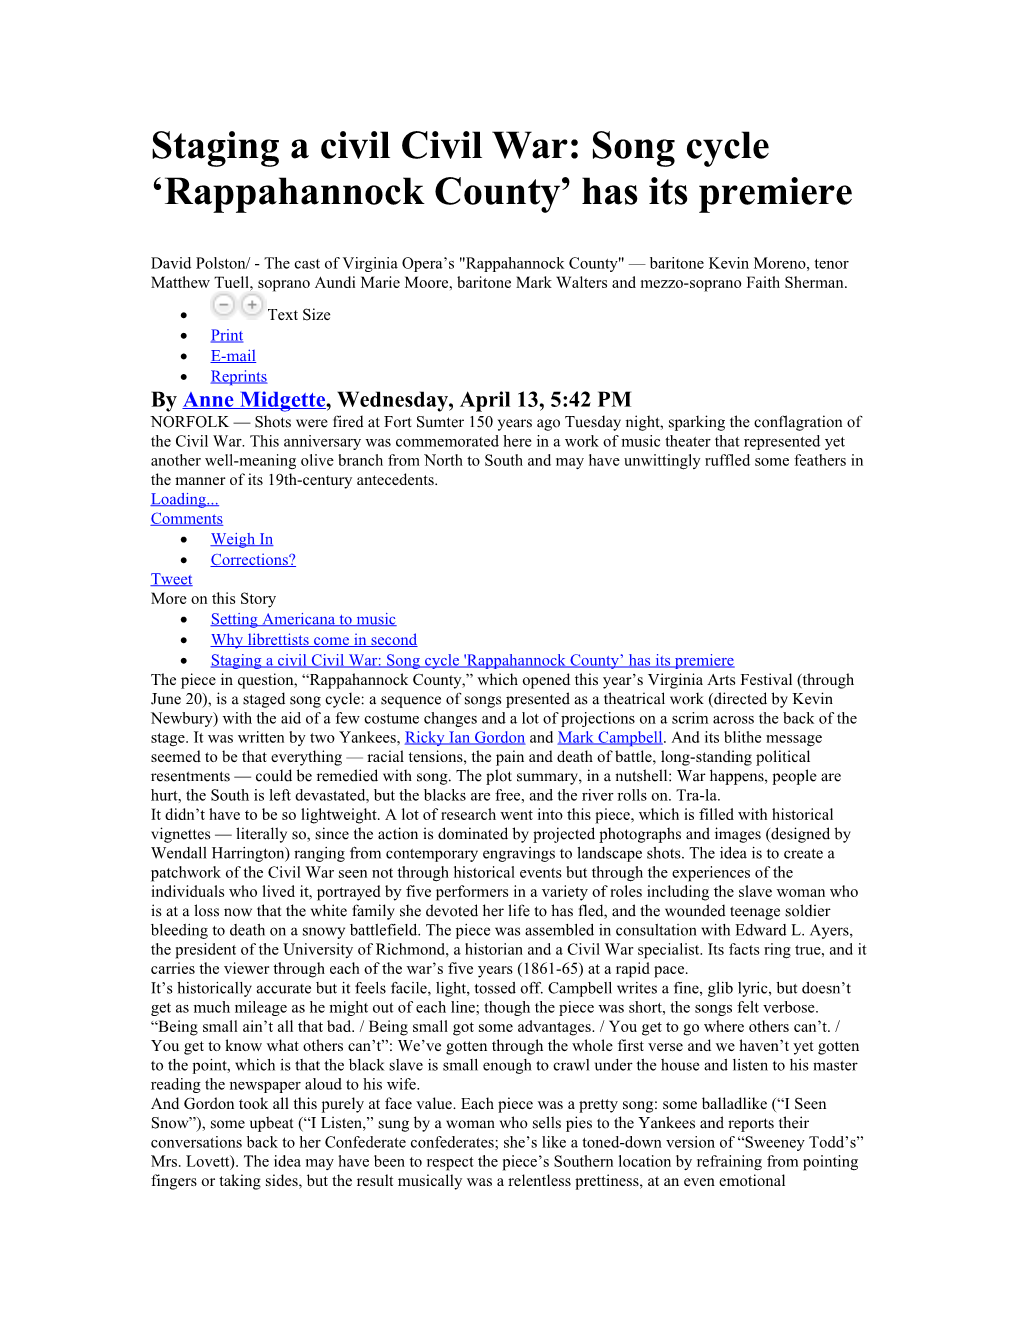 Staging a Civil Civil War: Song Cycle Rappahannock County Has Its Premiere